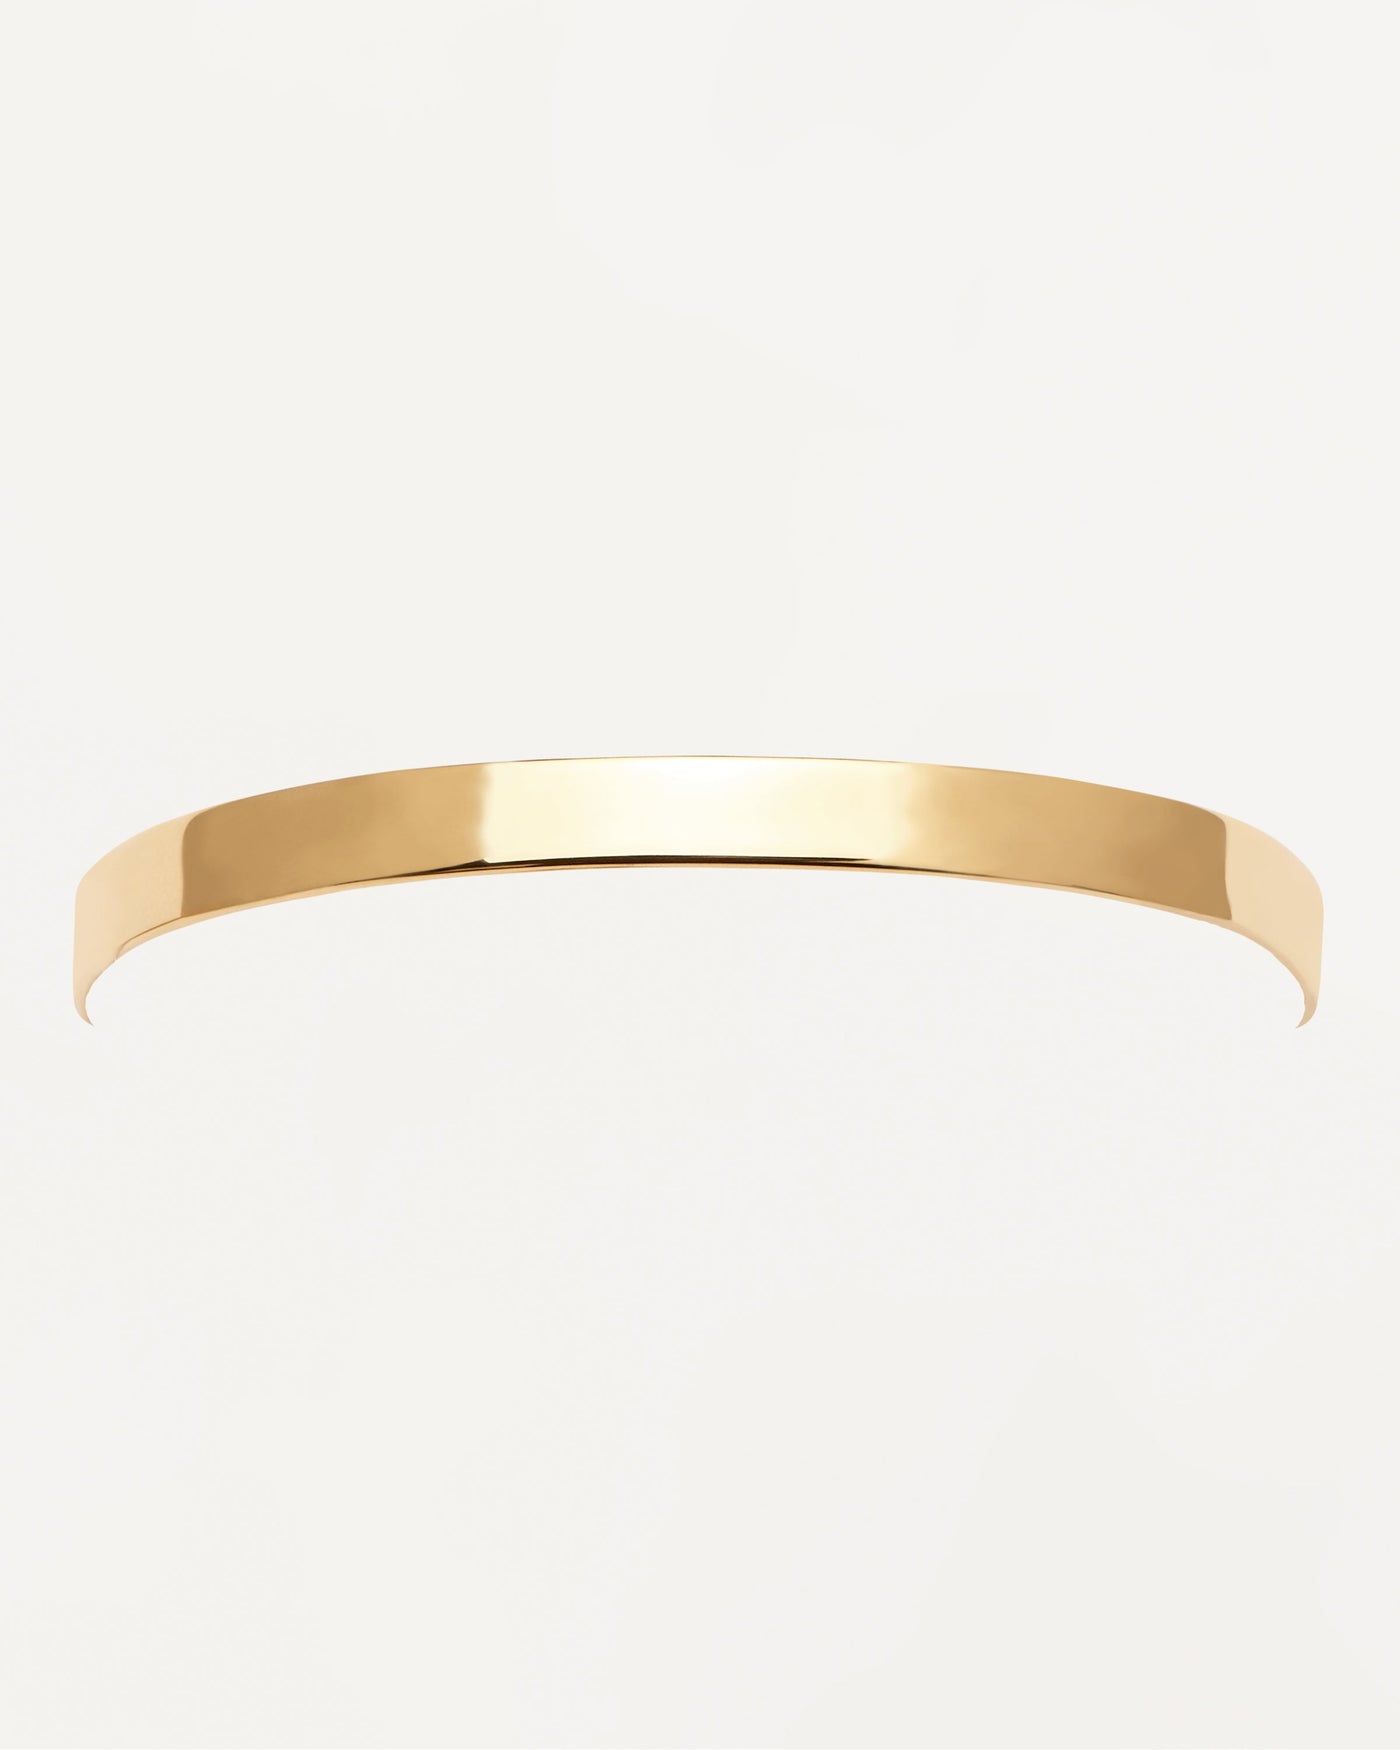 2023 Selection | Memora Bracelet. Gold-plated silver cuff bracelet to personalize with engraving. Get the latest arrival from PDPAOLA. Place your order safely and get this Best Seller. Free Shipping.